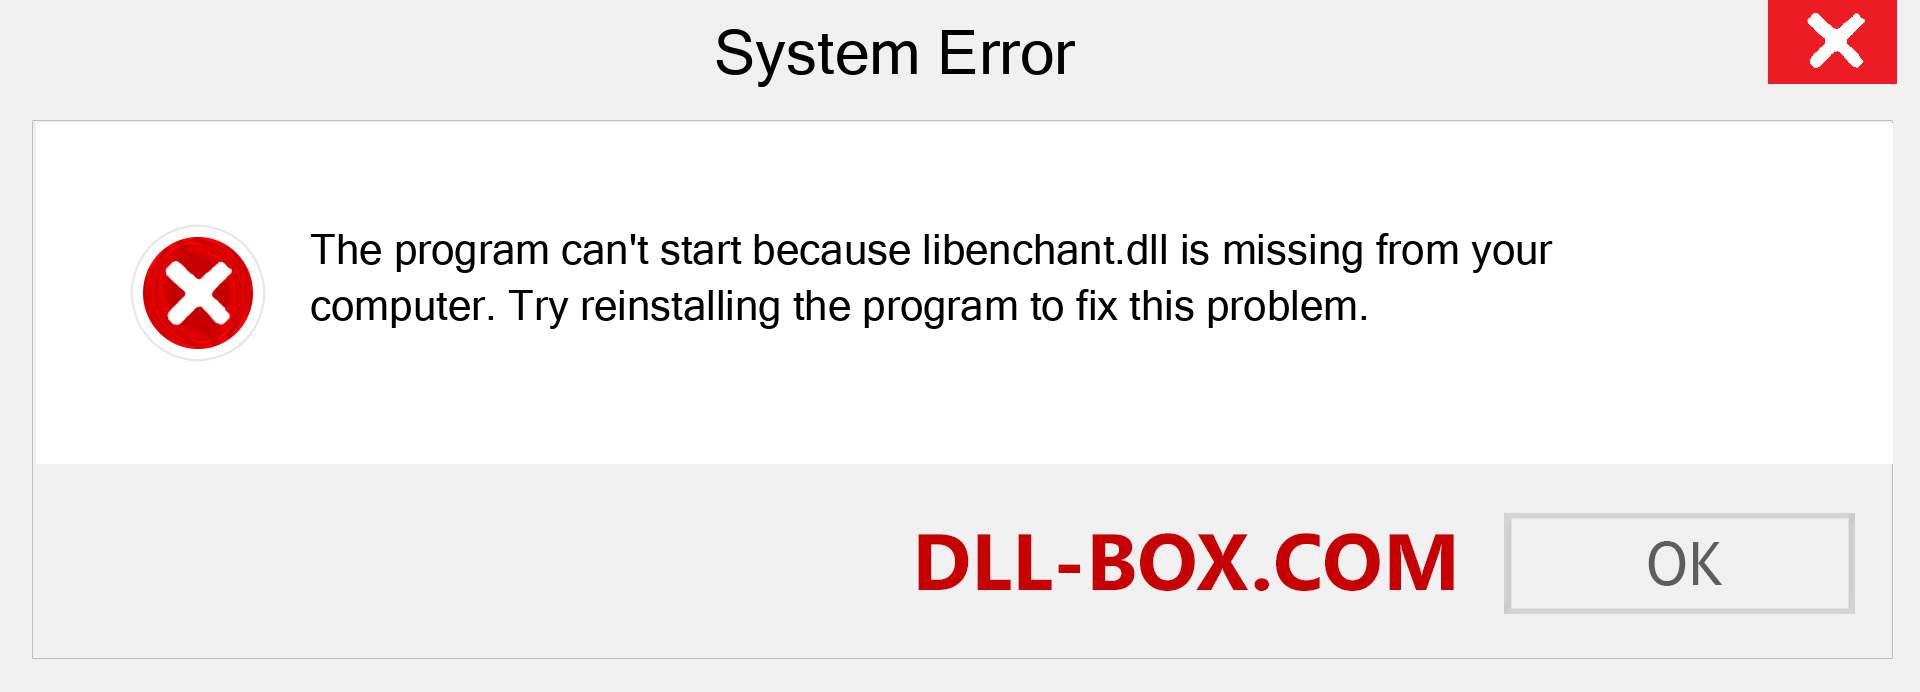  libenchant.dll file is missing?. Download for Windows 7, 8, 10 - Fix  libenchant dll Missing Error on Windows, photos, images